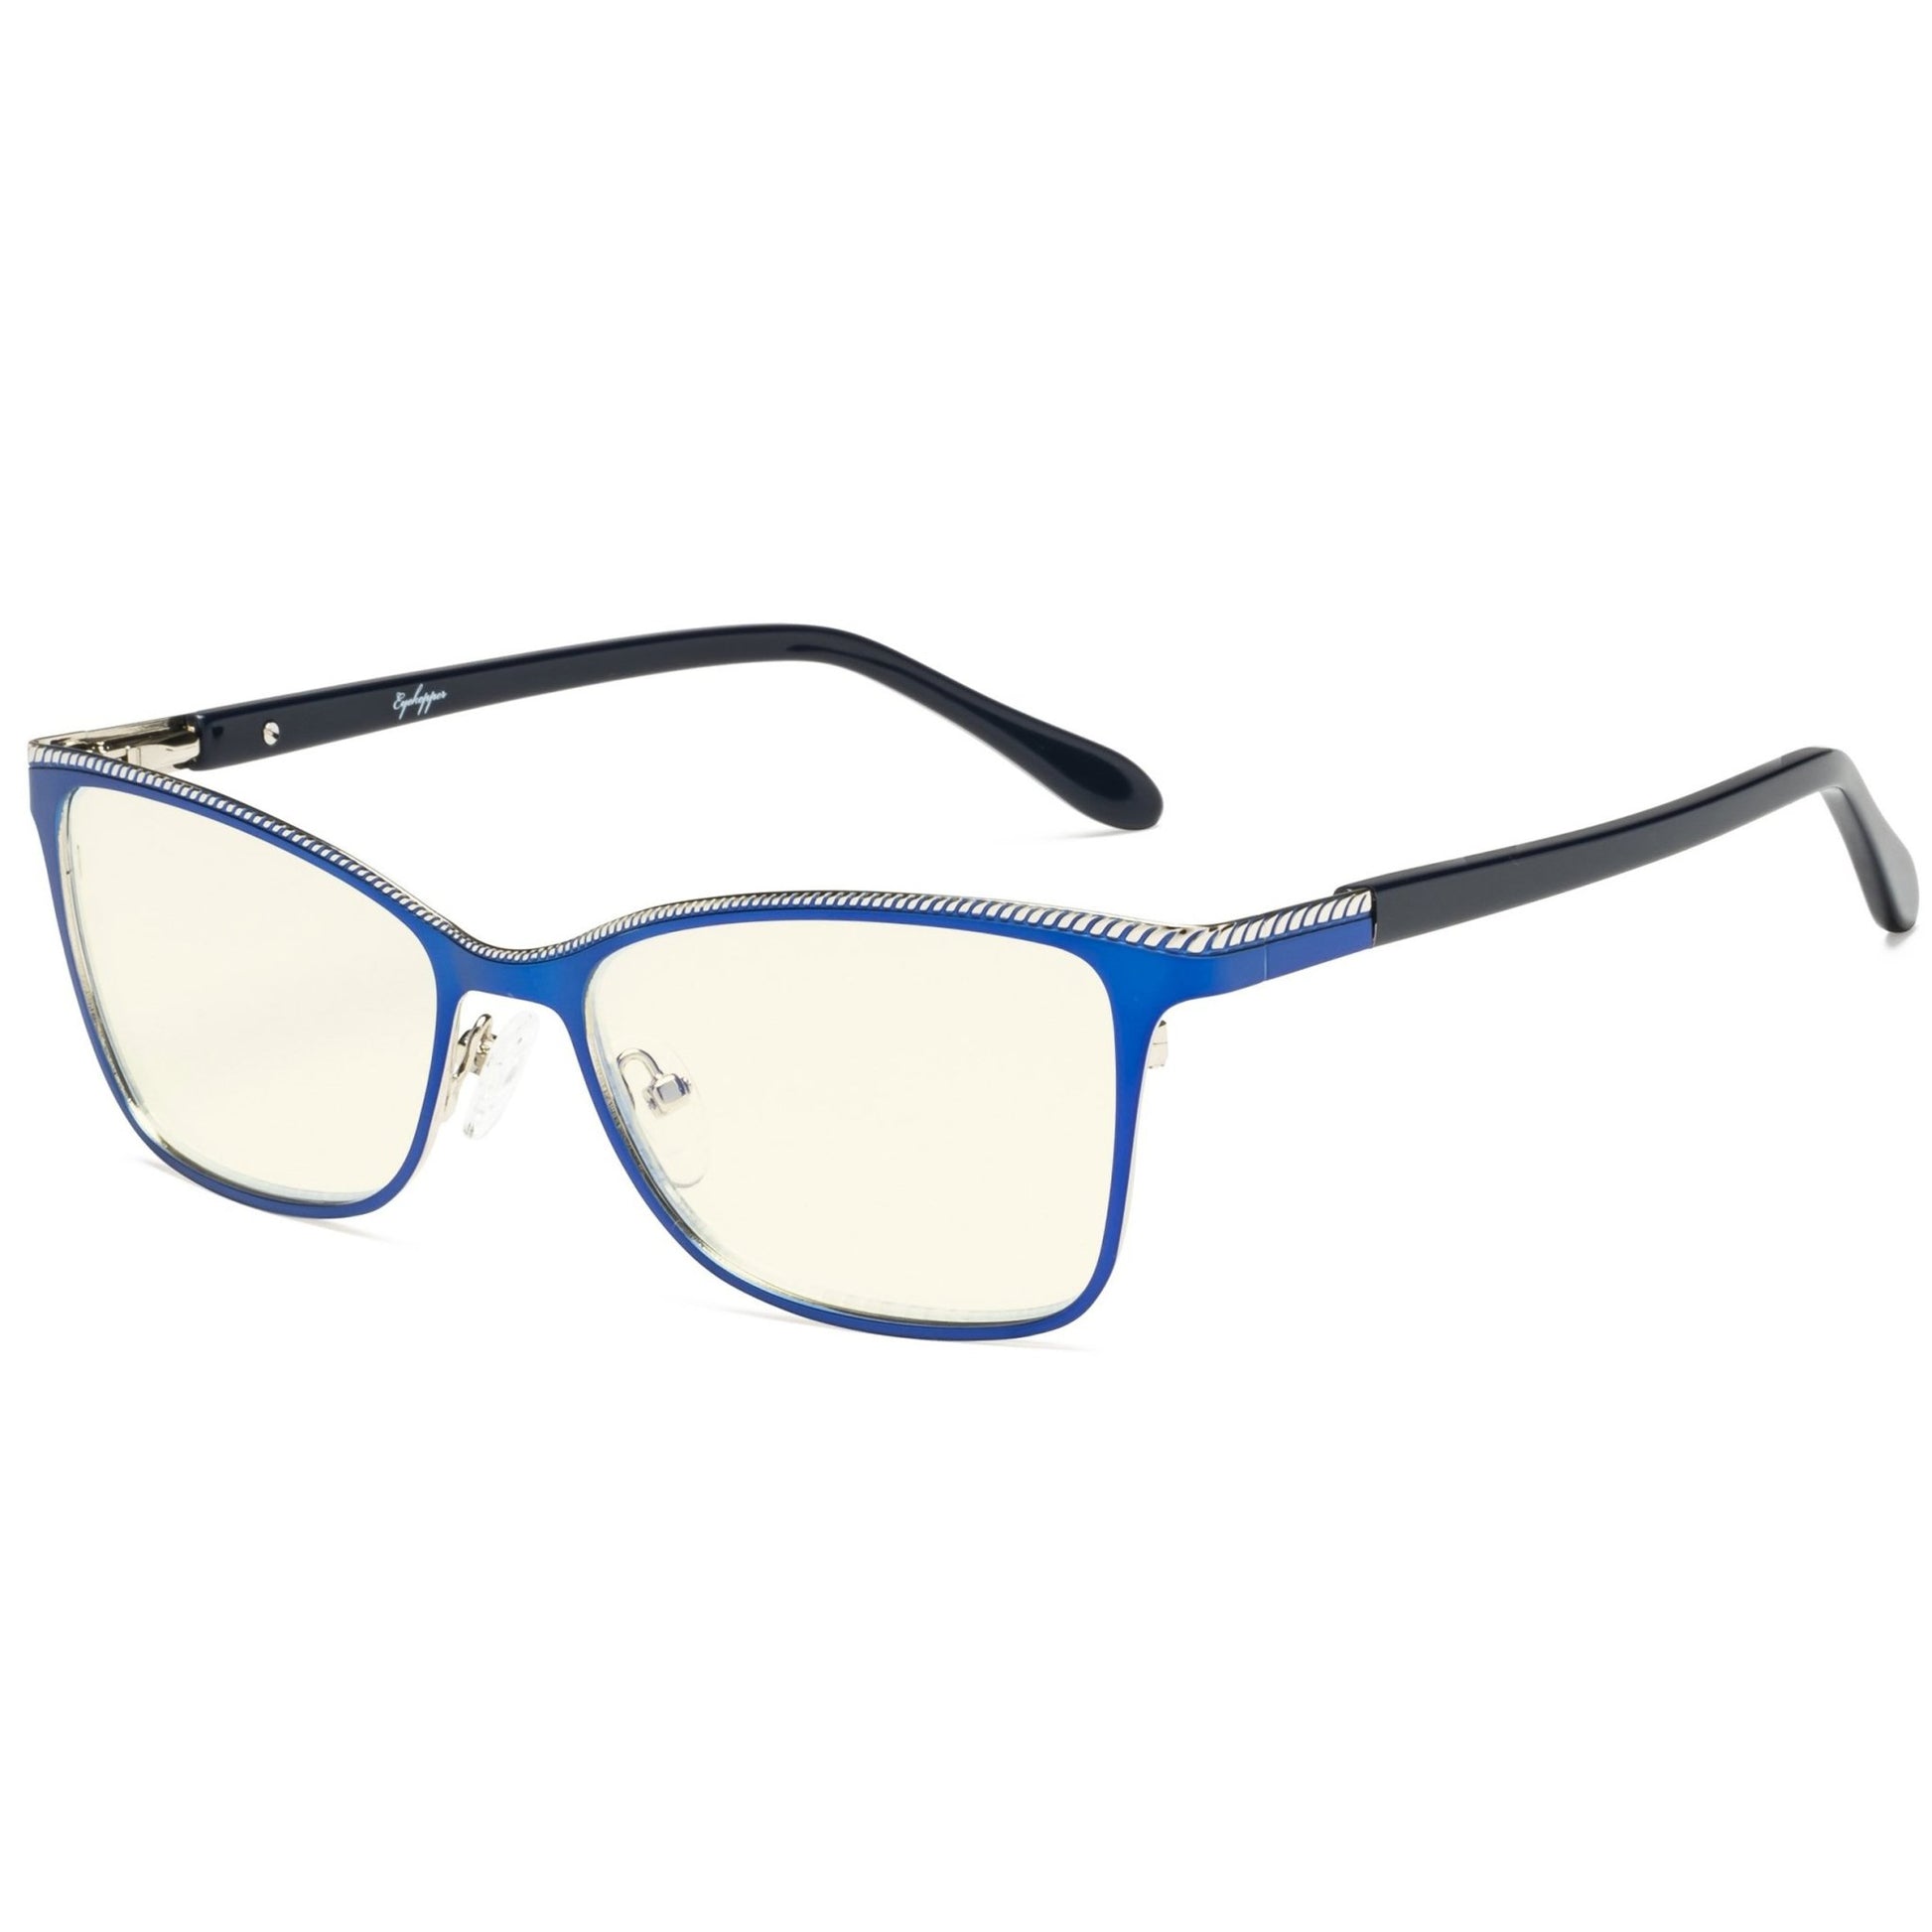 Computer Reading Glasses Blue Silver LX17020